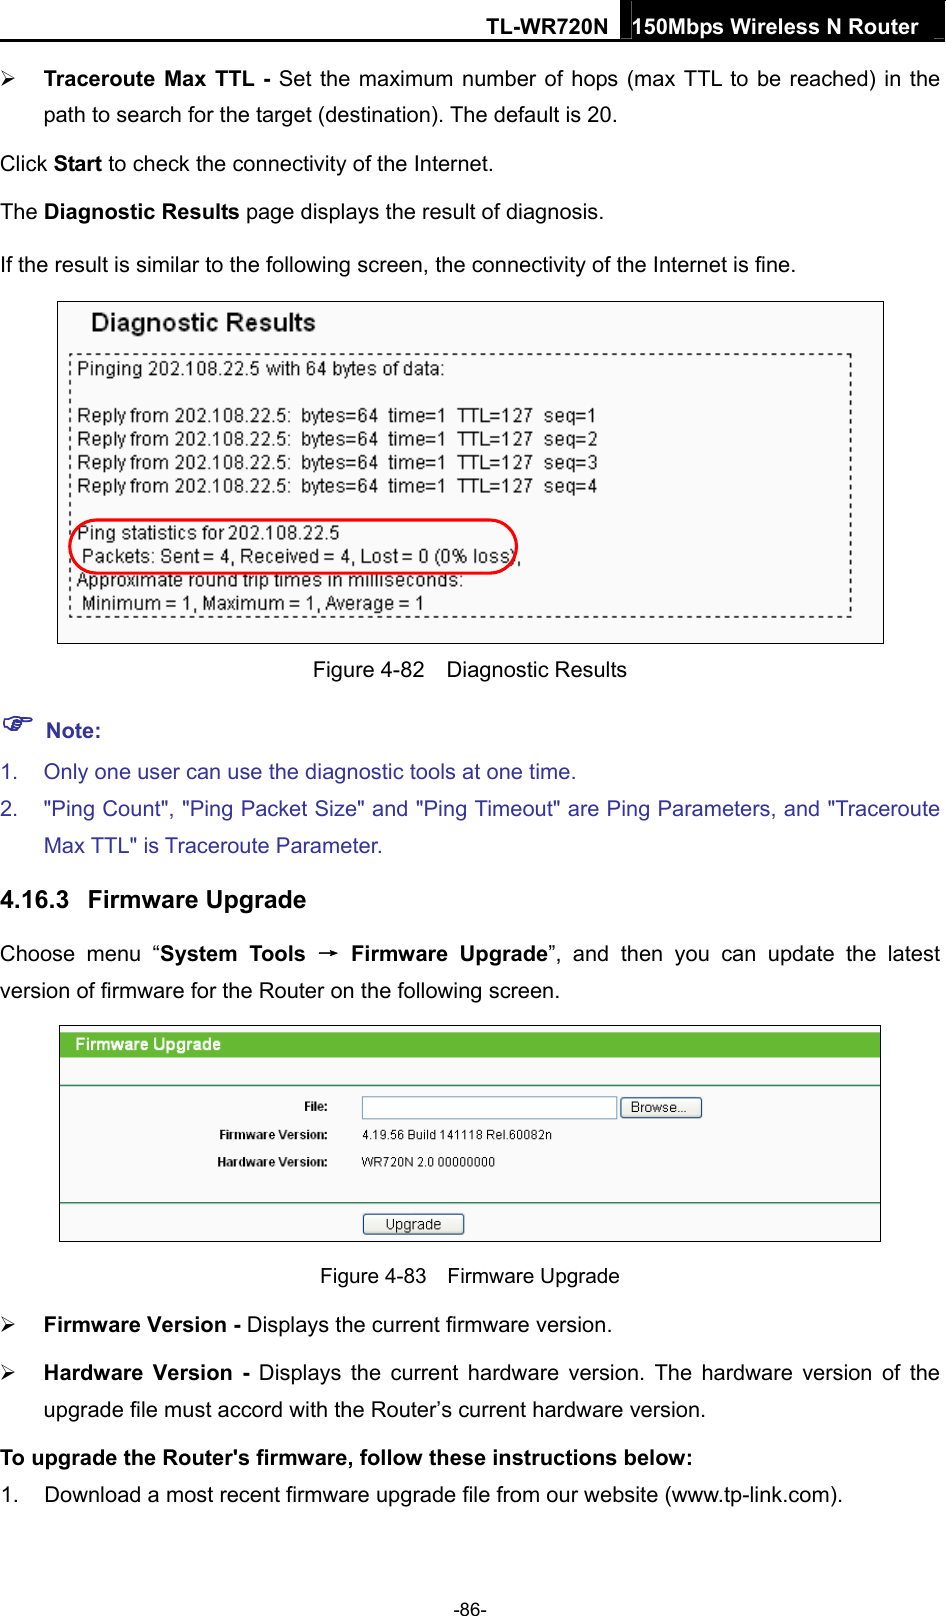 TL-WR720N 150Mbps Wireless N Router   Traceroute Max TTL - Set the maximum number of hops (max TTL to be reached) in the path to search for the target (destination). The default is 20. Click Start to check the connectivity of the Internet.   The Diagnostic Results page displays the result of diagnosis. If the result is similar to the following screen, the connectivity of the Internet is fine.  Figure 4-82  Diagnostic Results  Note: 1.  Only one user can use the diagnostic tools at one time.   2.  &quot;Ping Count&quot;, &quot;Ping Packet Size&quot; and &quot;Ping Timeout&quot; are Ping Parameters, and &quot;Traceroute Max TTL&quot; is Traceroute Parameter.   4.16.3  Firmware Upgrade Choose menu “System Tools → Firmware Upgrade”, and then you can update the latest version of firmware for the Router on the following screen.  Figure 4-83  Firmware Upgrade  Firmware Version - Displays the current firmware version.  Hardware Version - Displays the current hardware version. The hardware version of the upgrade file must accord with the Router’s current hardware version. To upgrade the Router&apos;s firmware, follow these instructions below: 1.  Download a most recent firmware upgrade file from our website (www.tp-link.com).   -86- 